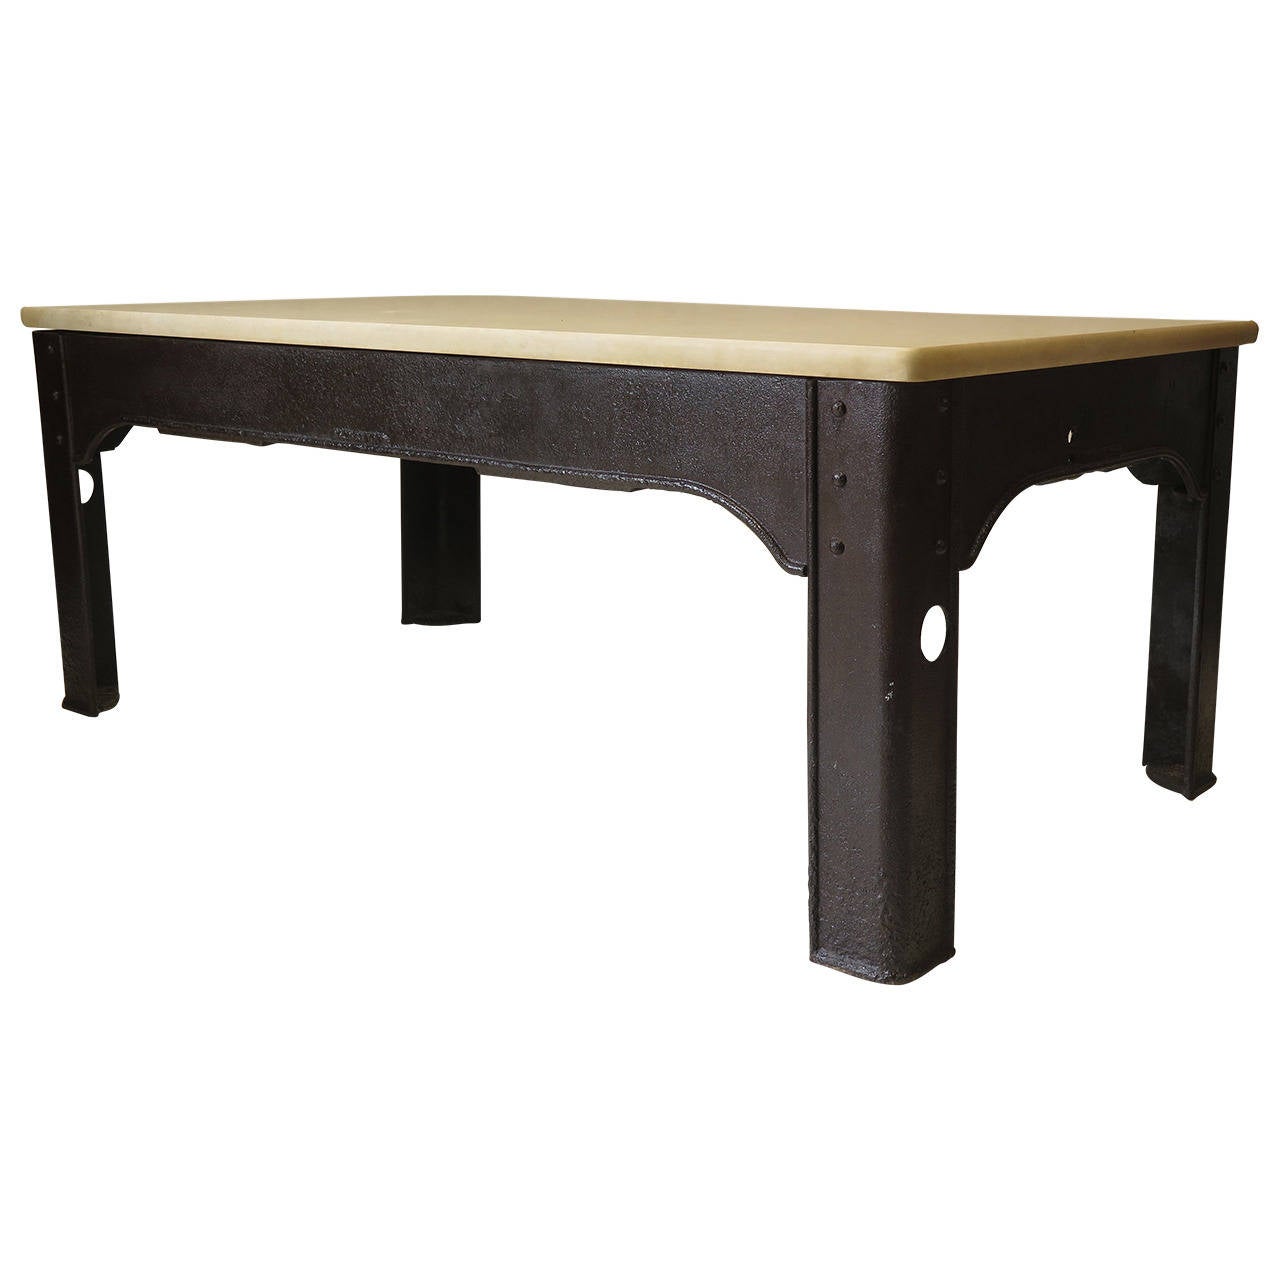 Riveted Iron Work Table with Stone Top, France, 1900s